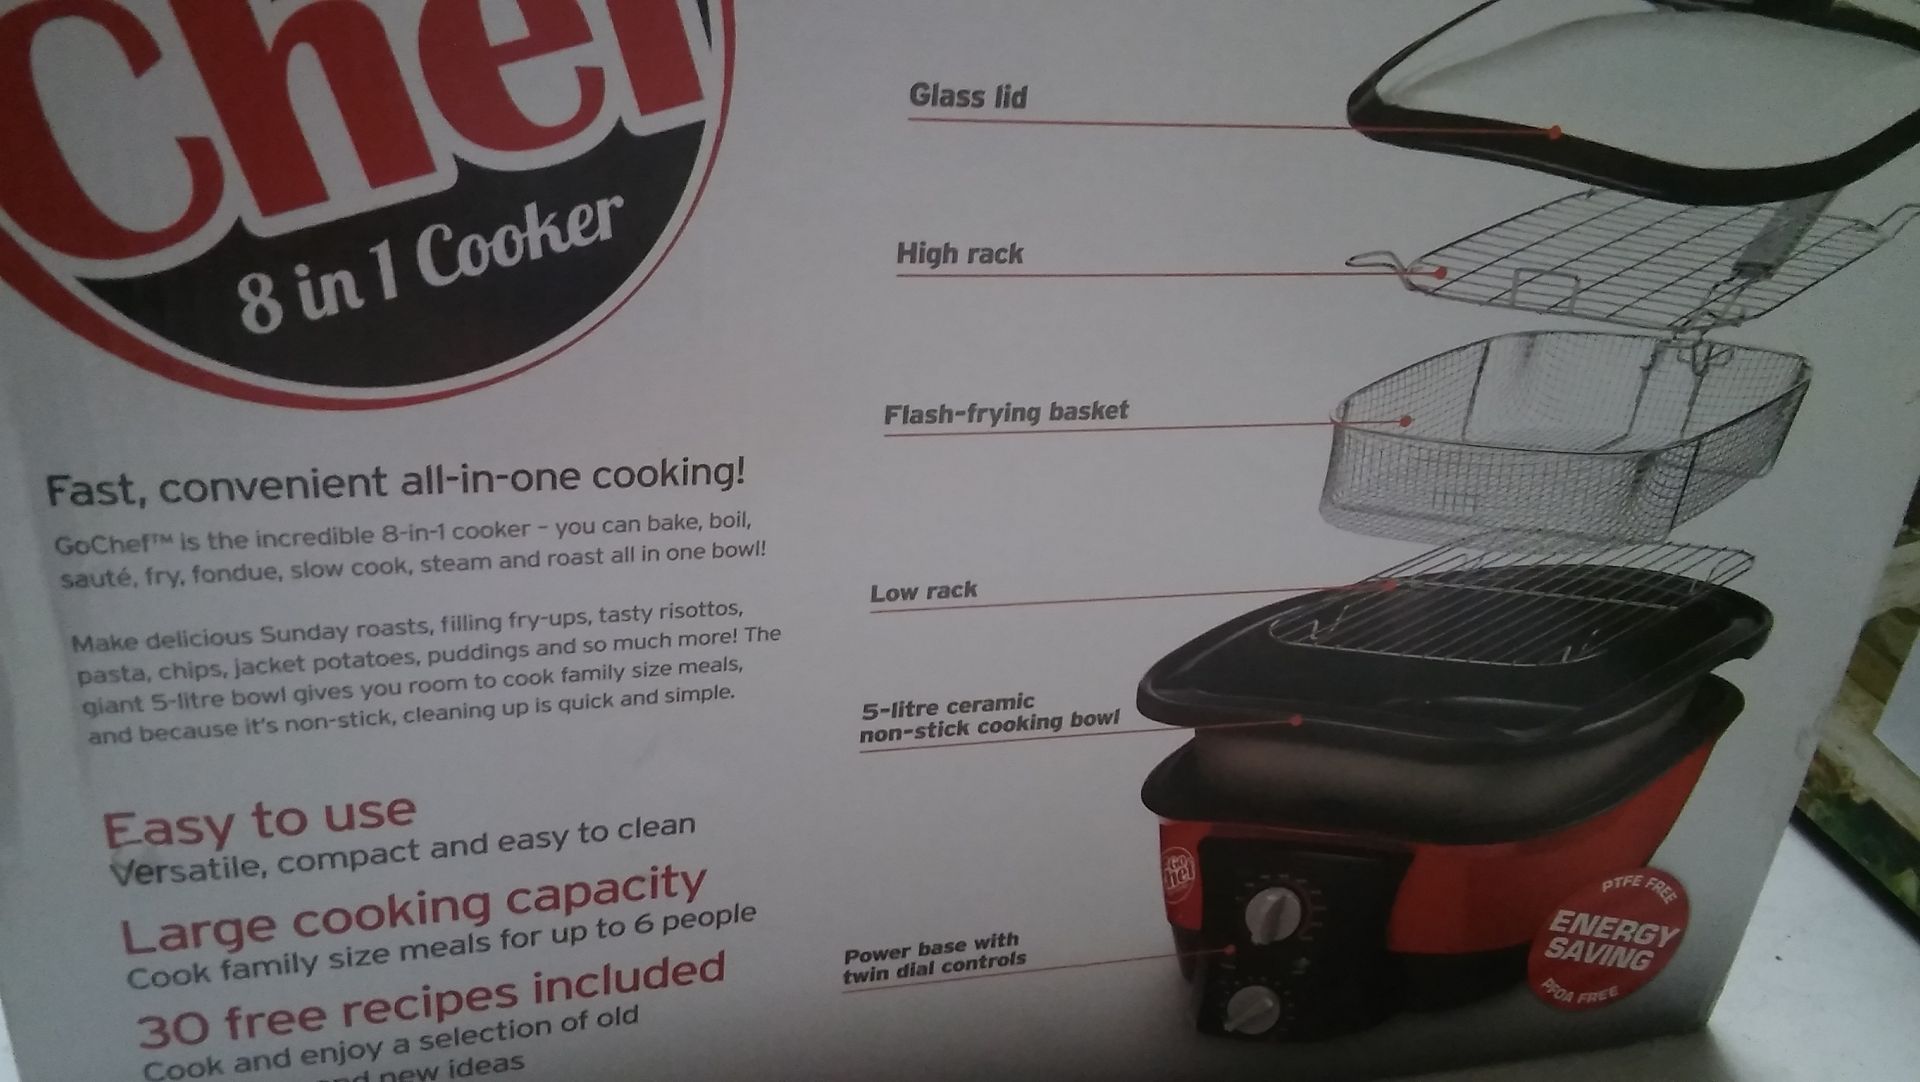 "Go Chef" 8 in 1 cooker.As new. - Image 2 of 2